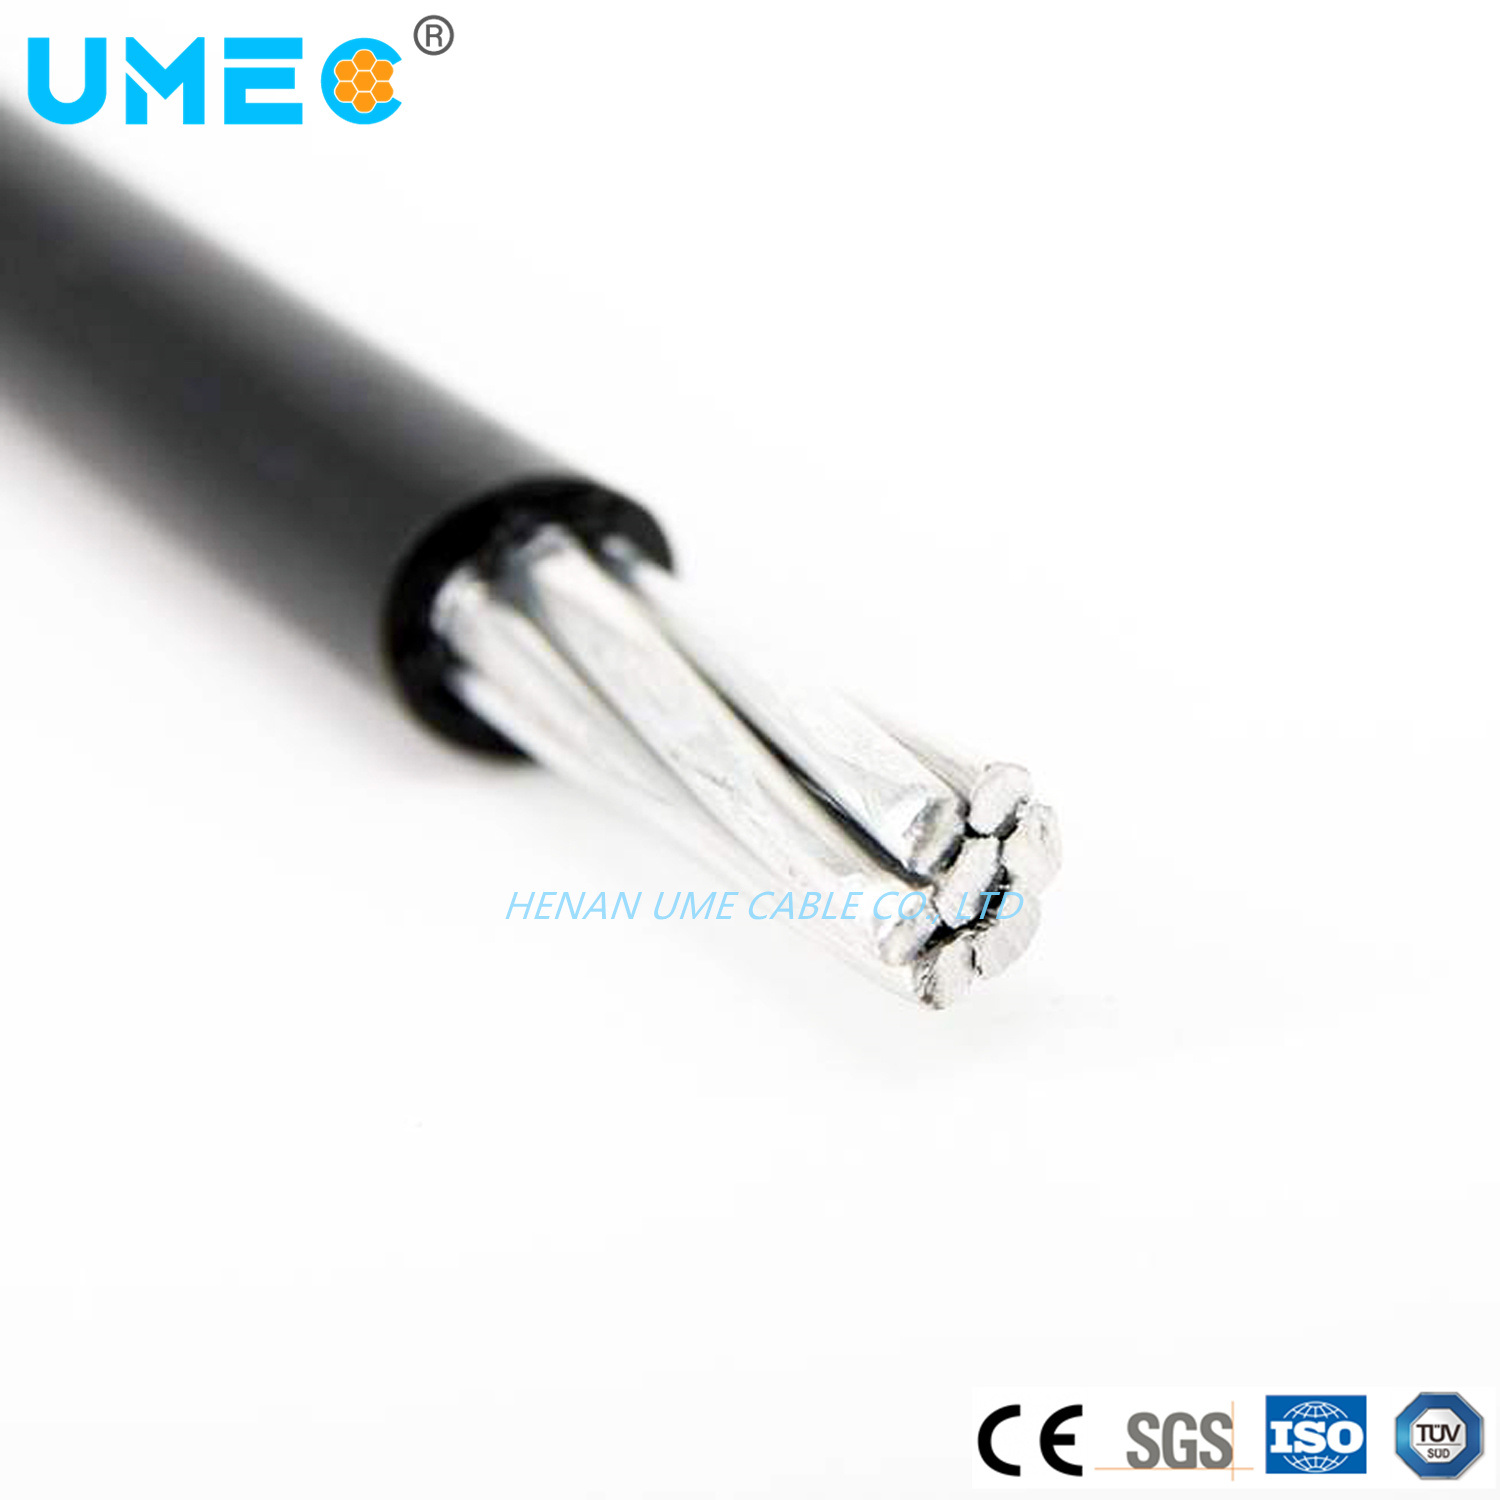 Copper Xhhw-2 600V XLPE Insulation Special Cable